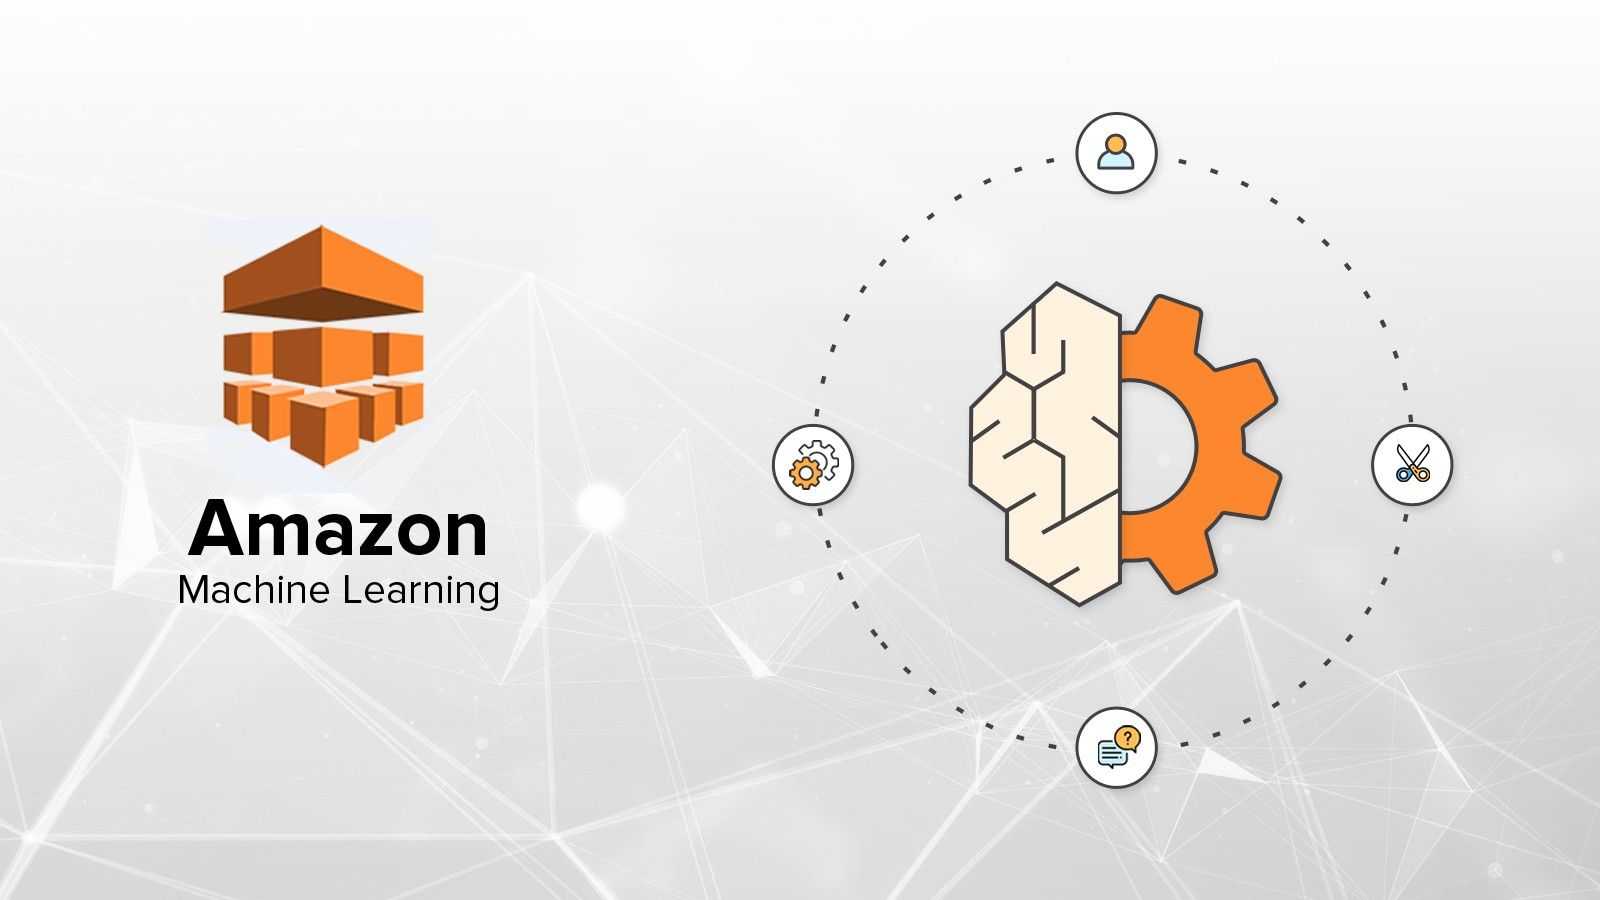 AWS Certified Machine Learning (Specialty) Training course and certification